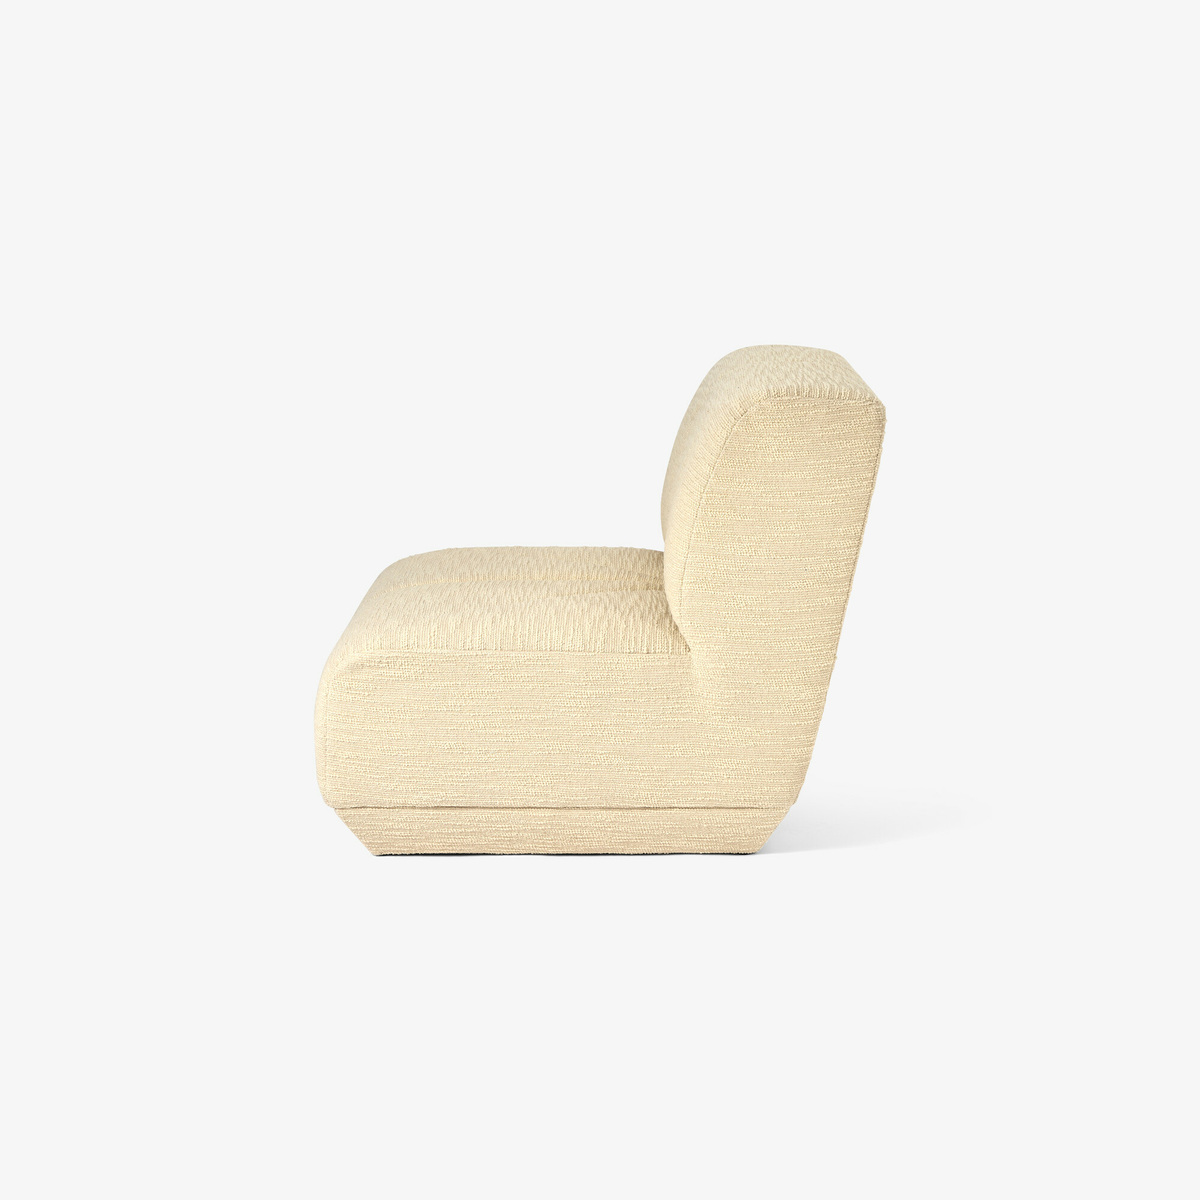 Chill Armchair, Off-White - Curl fabric - image 4